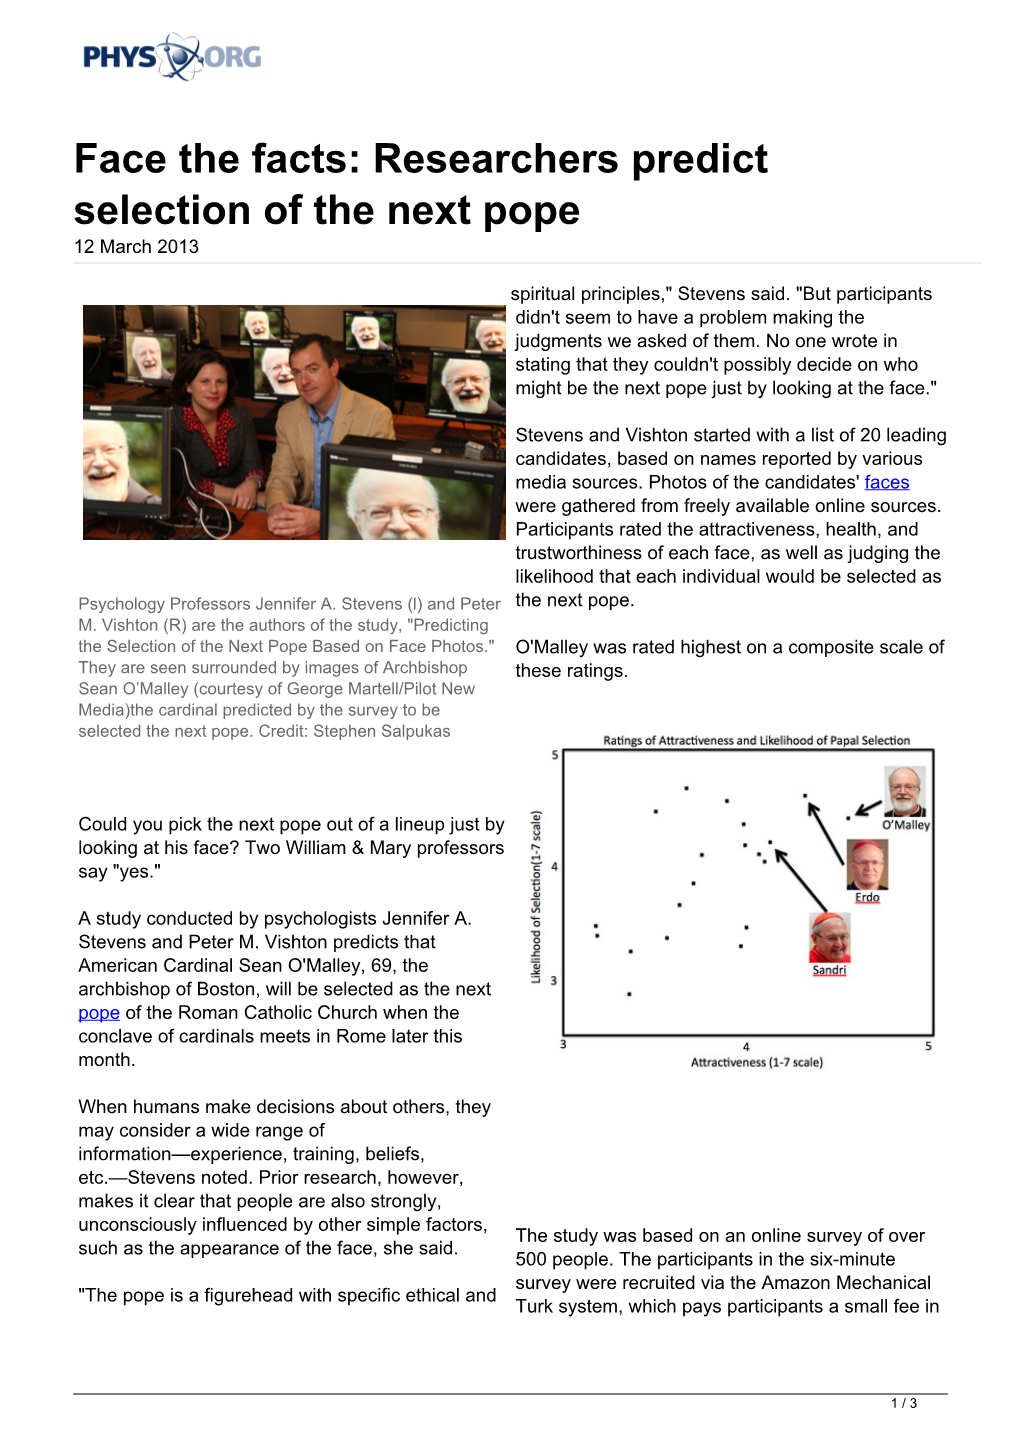 Face the Facts: Researchers Predict Selection of the Next Pope 12 March 2013